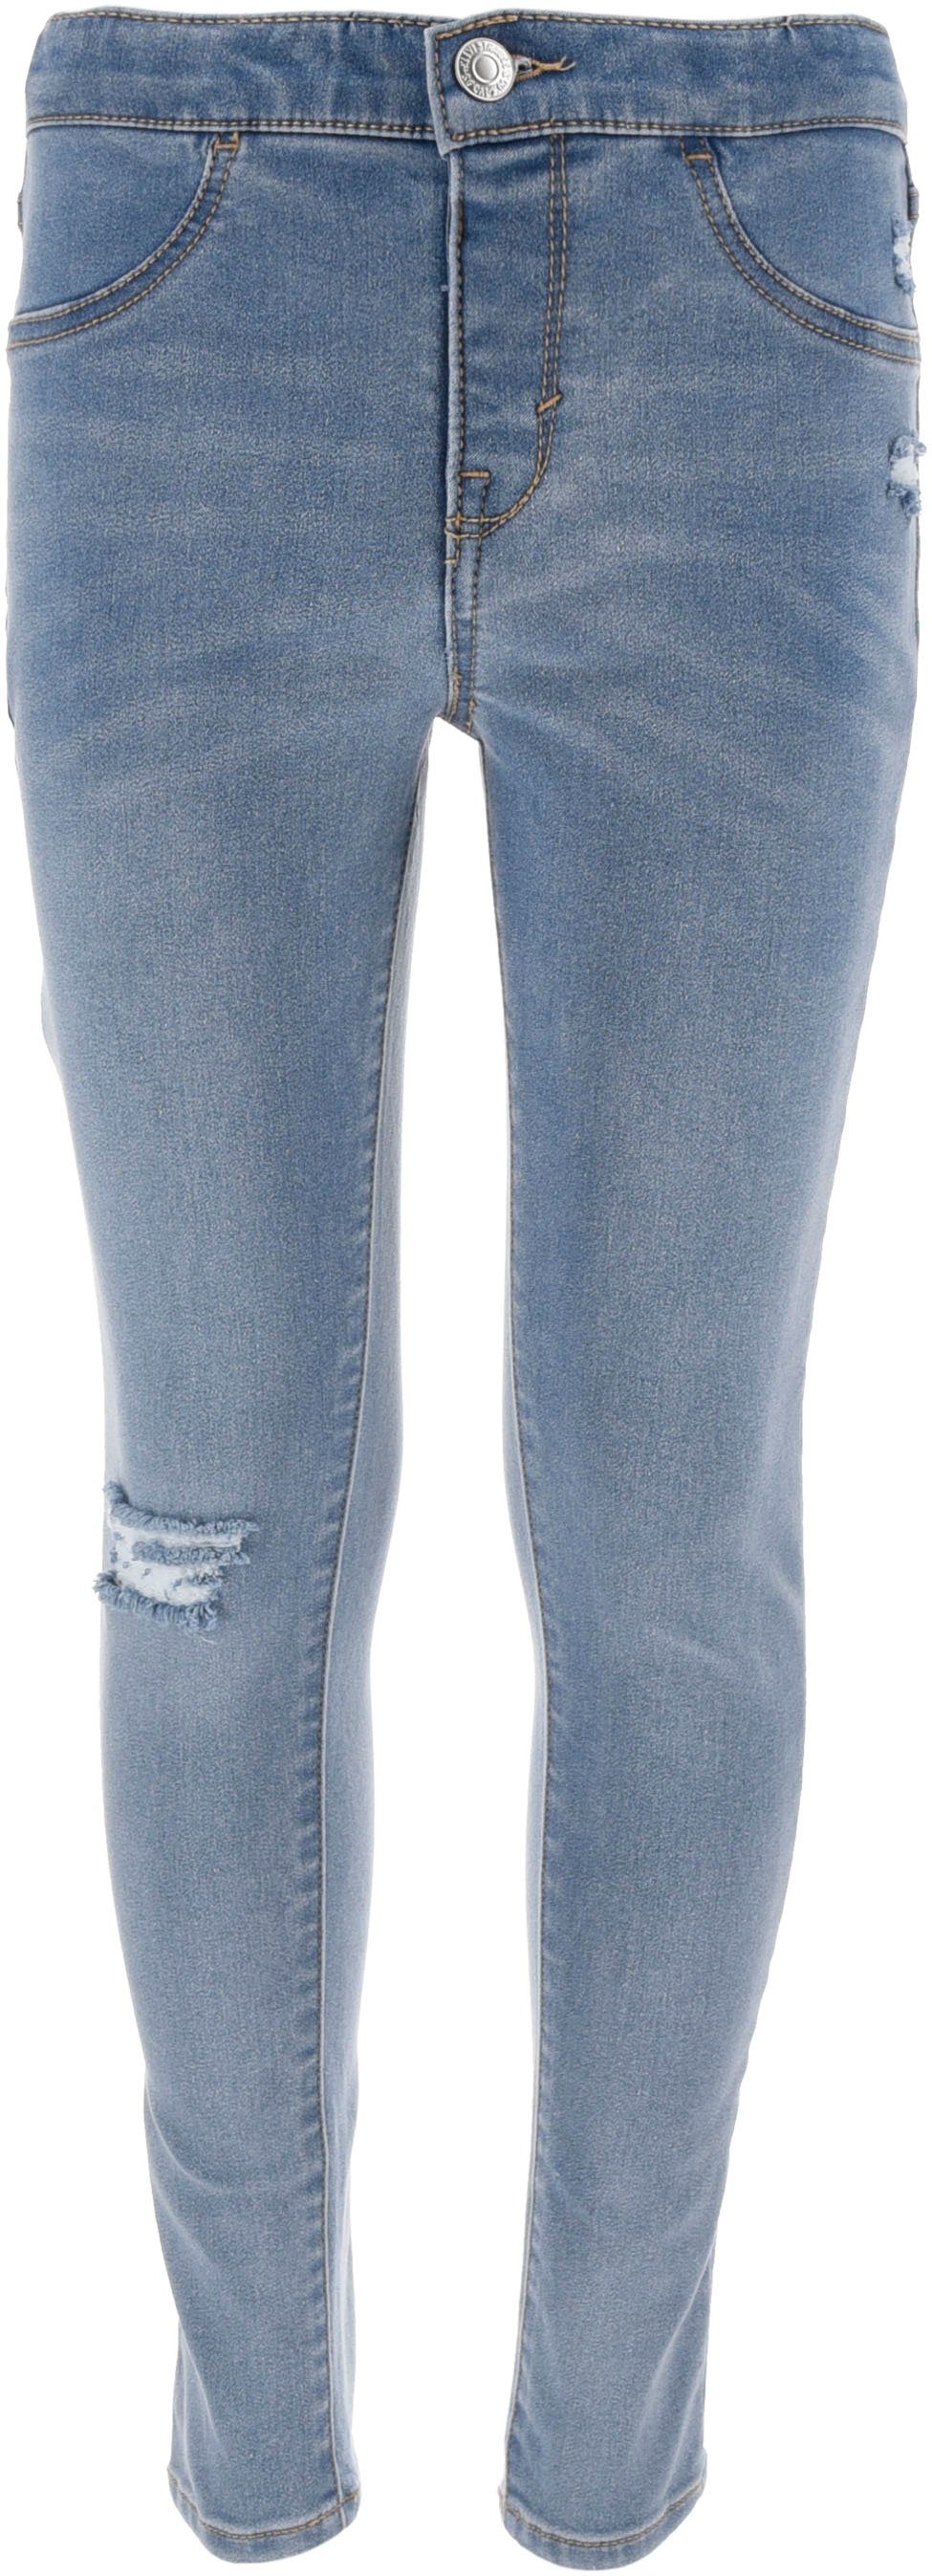 PULL-ON LEGGINGS Jeansjeggings GIRLS for miami Levi's® Kids vices